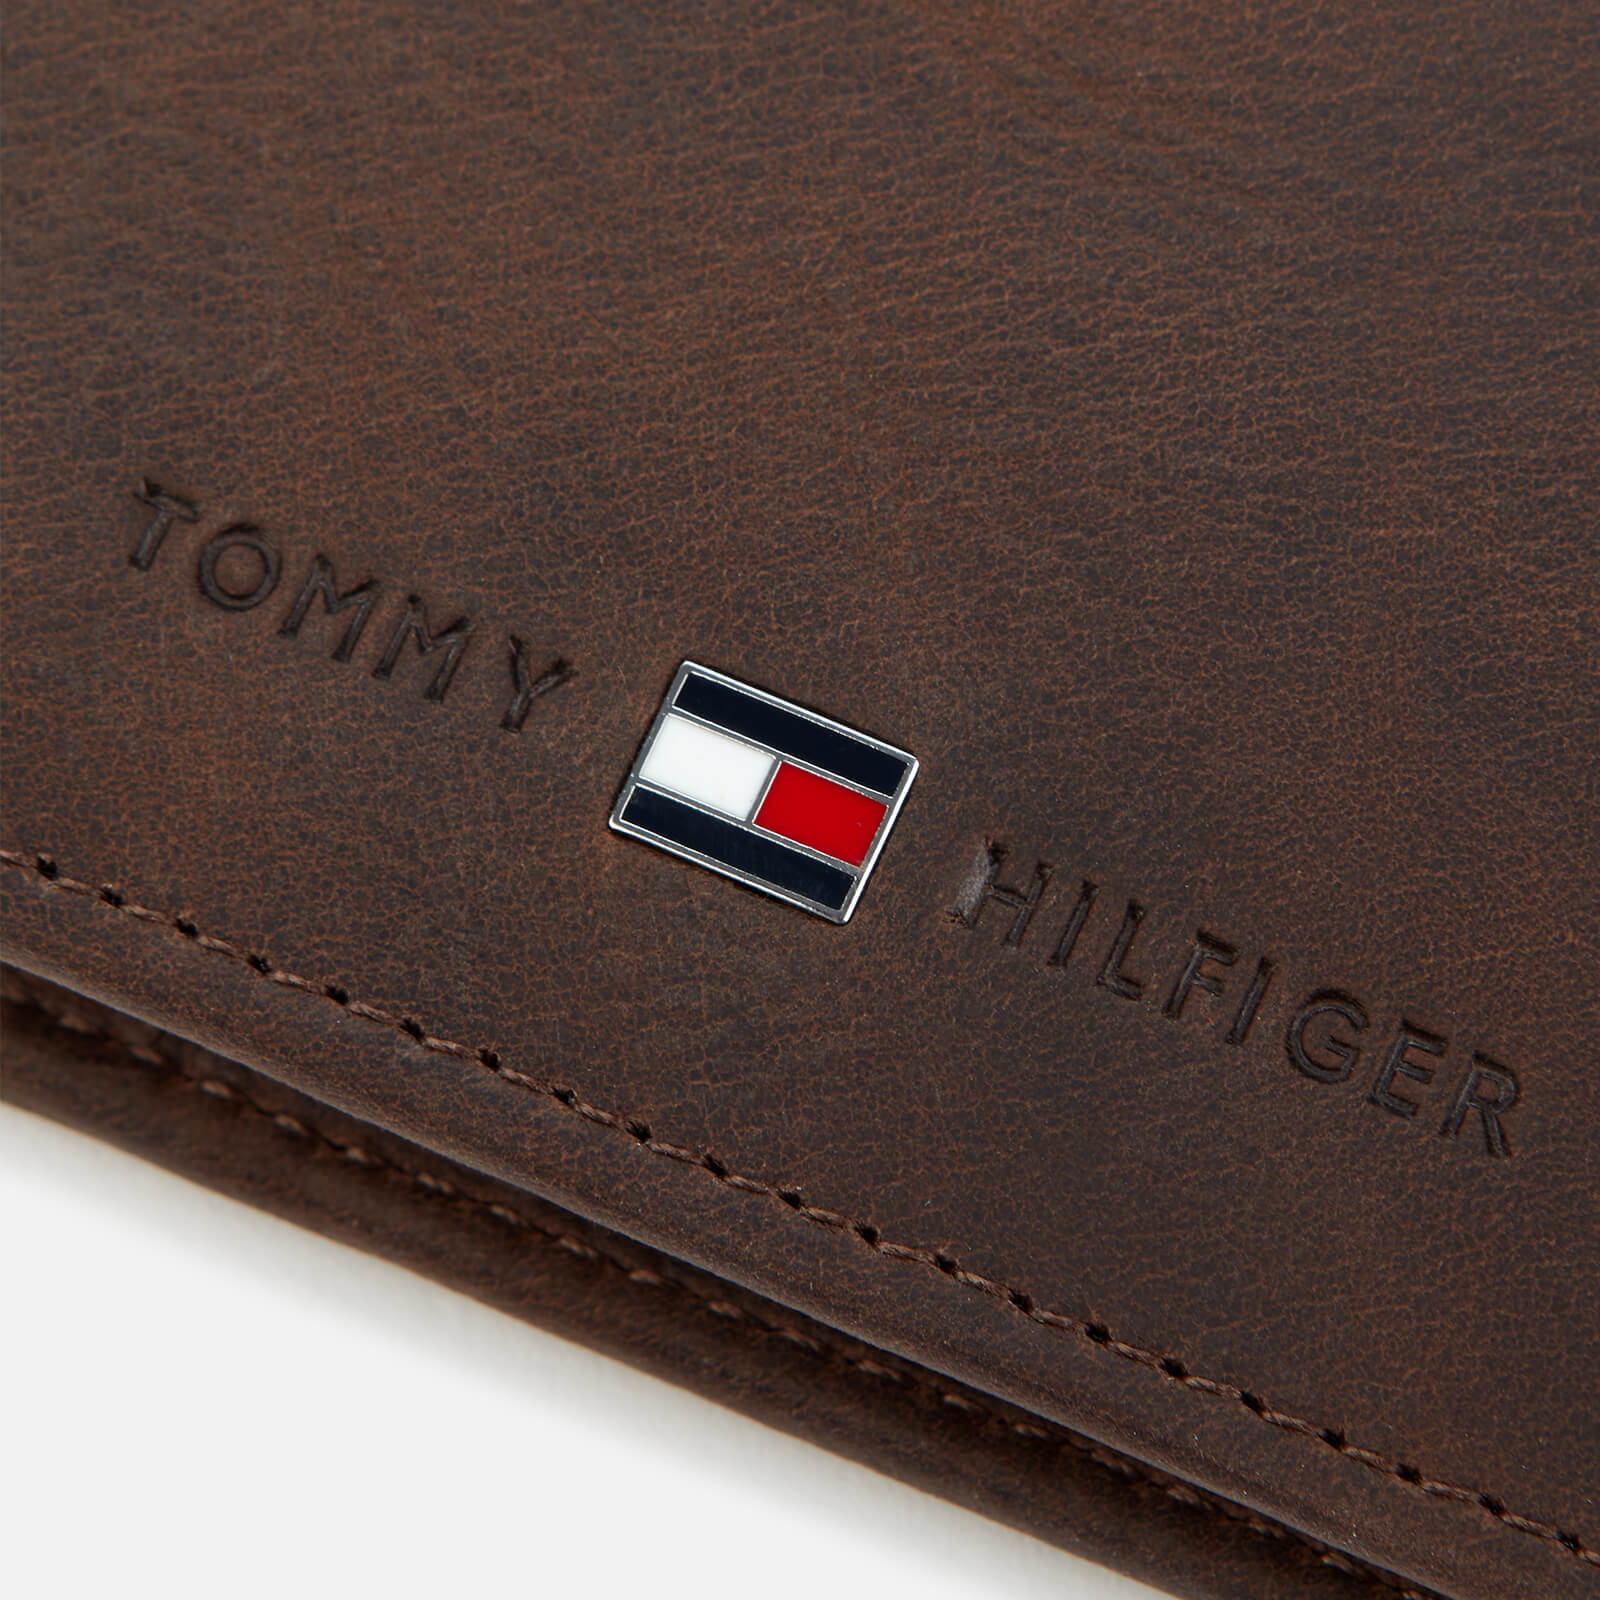 Tommy Hilfiger Men's Johnson Mini Credit Card And Coin Pocket Wallet - Brown Am0am00659041 Mens Accessories, Brown